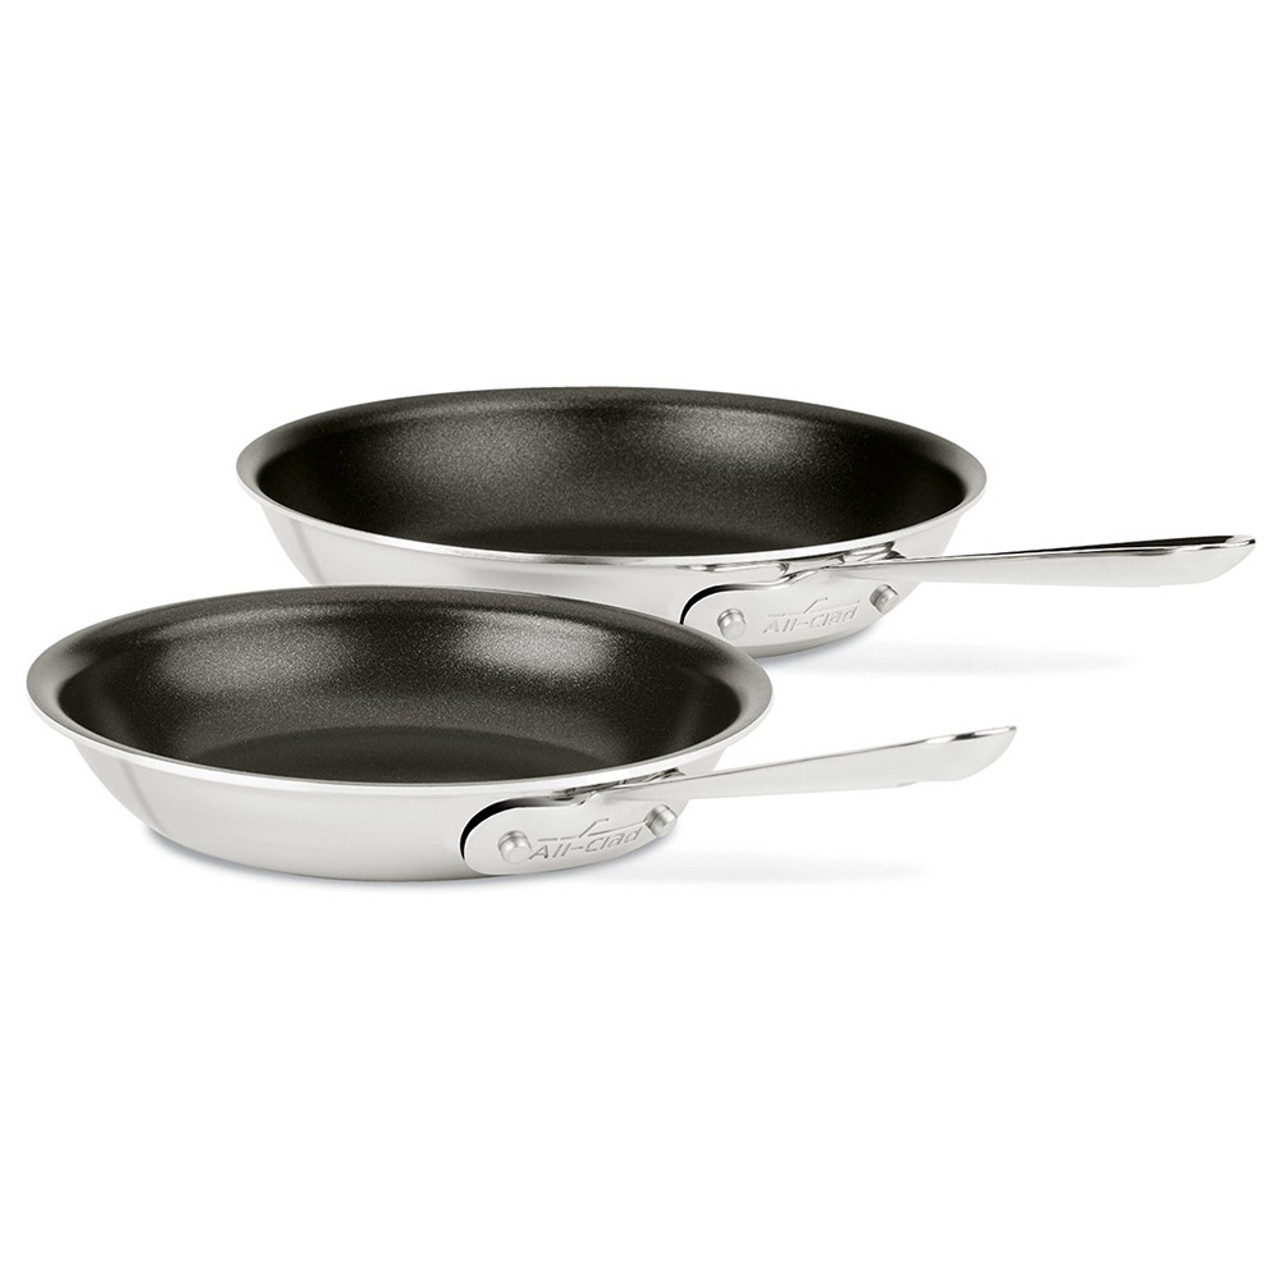 https://cdn11.bigcommerce.com/s-hccytny0od/images/stencil/1280x1280/products/3820/13797/all-clad-d3-stainless-steel-nonstick-fry-pan-set__95787.1607610192.jpg?c=2?imbypass=on